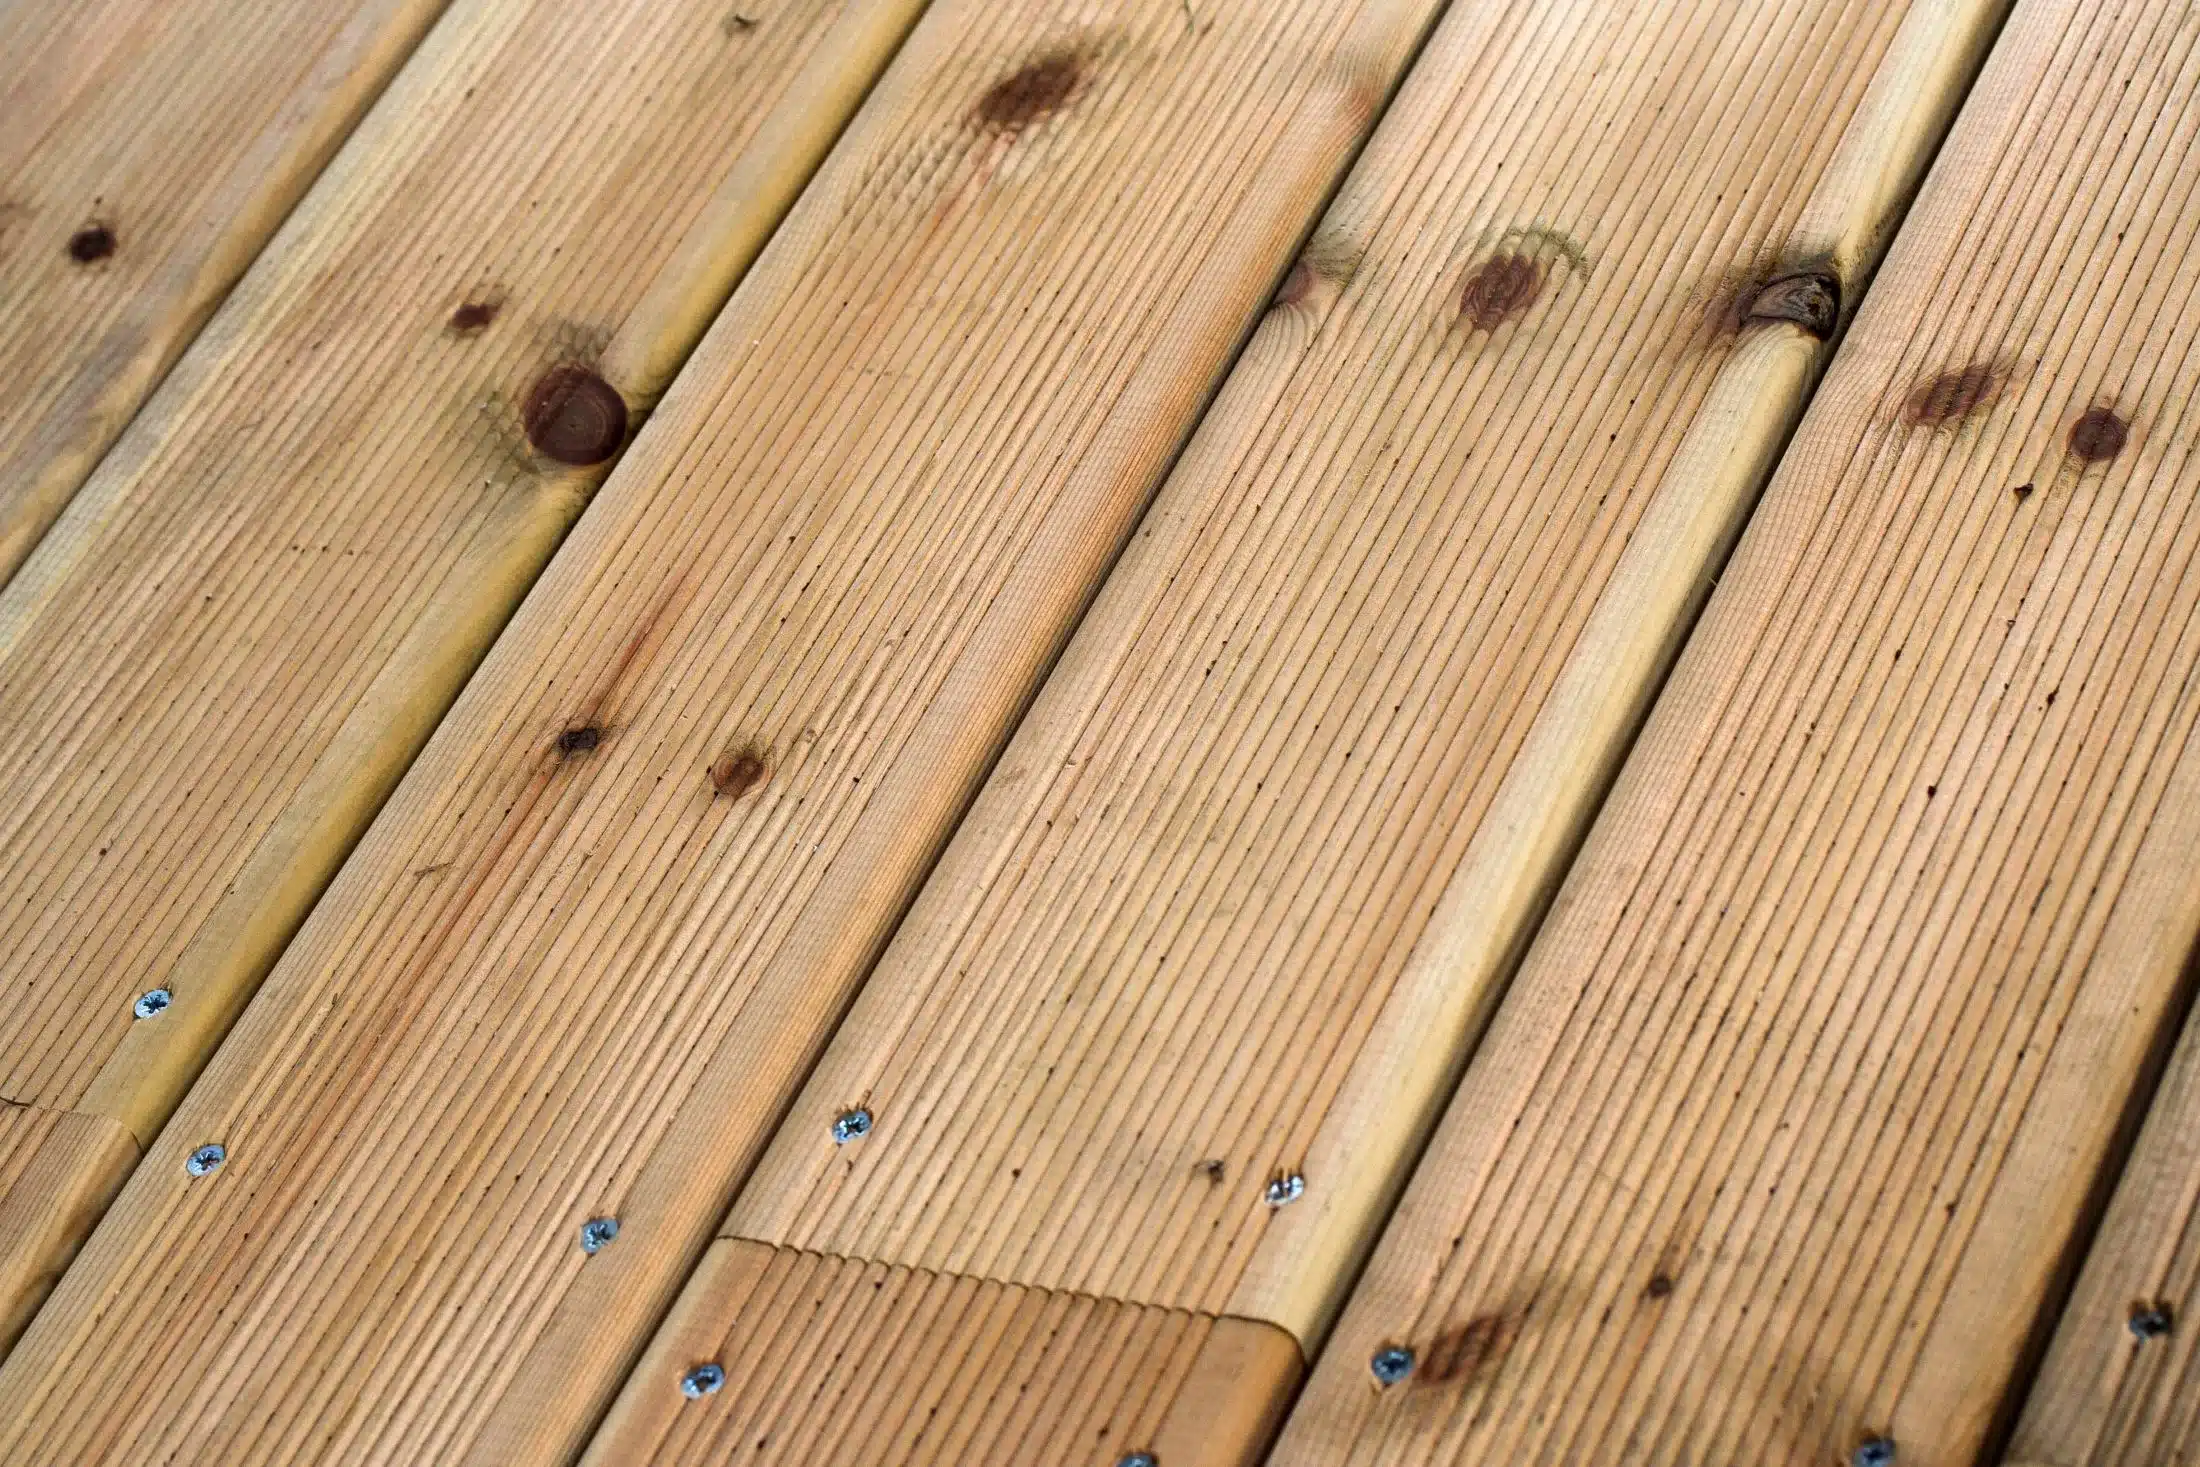 Sykesville Maryland professional decking contractor